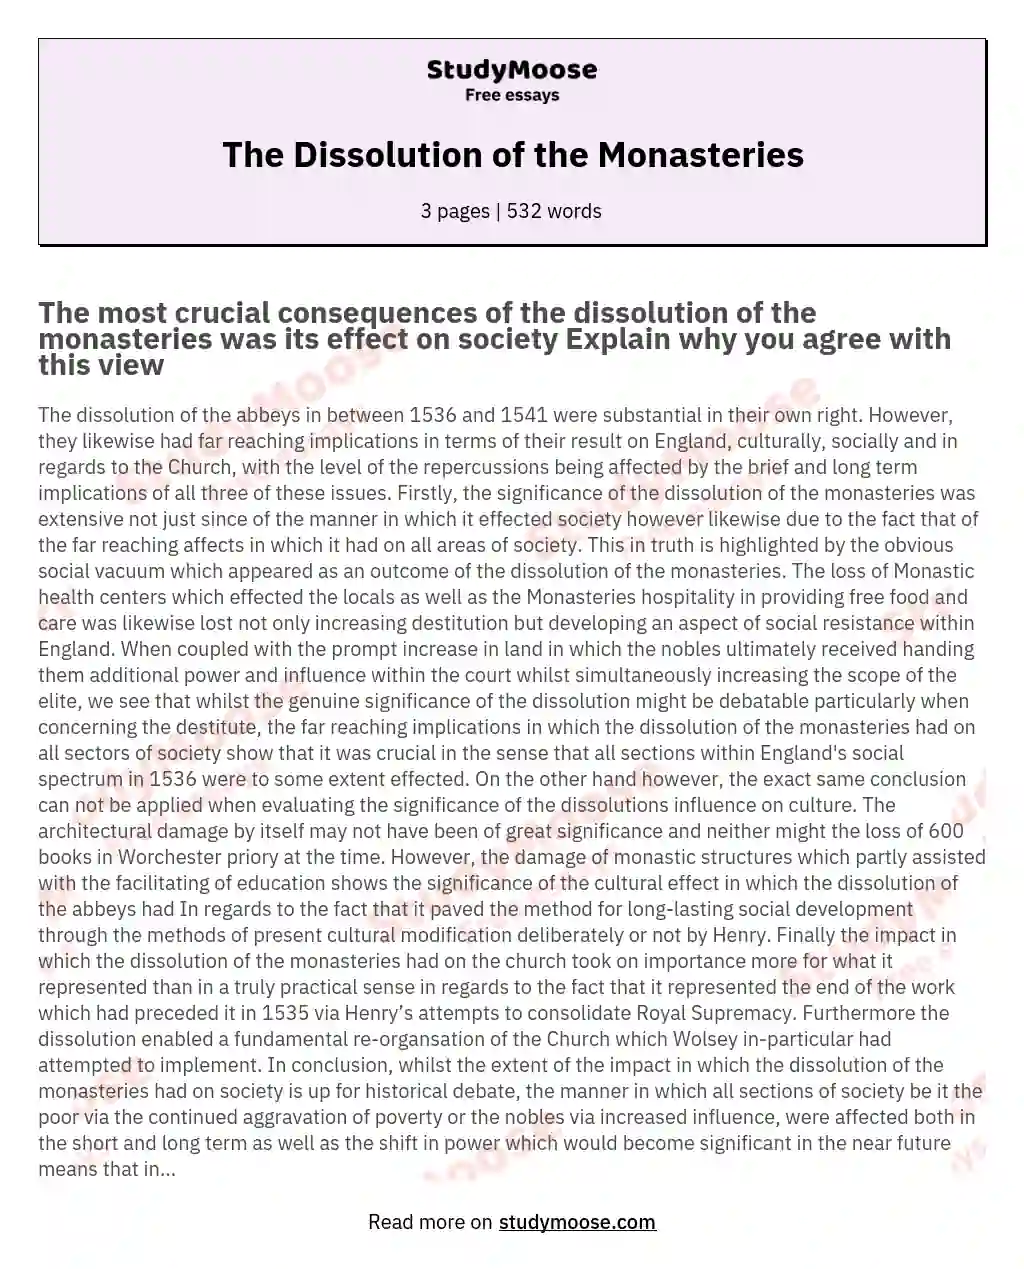 The Dissolution of the Monasteries essay